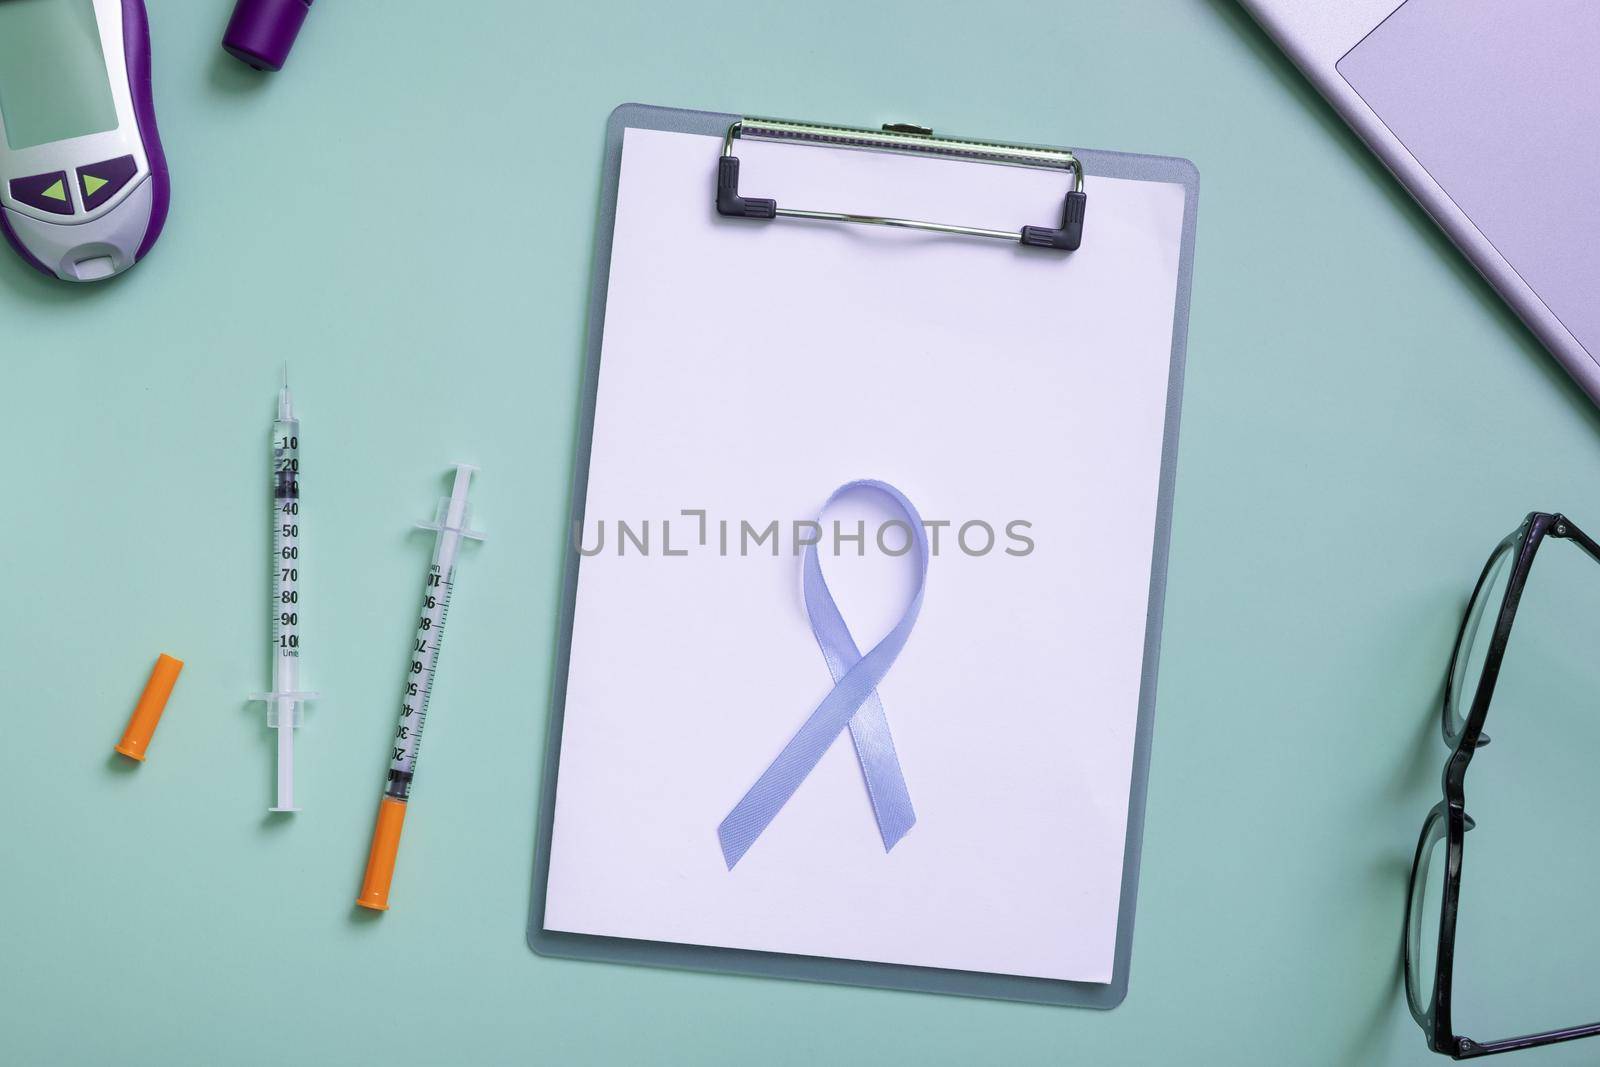 Blue ribbon and glucometer, medical supplies on color background top view with copy space. World diabetes day concept by ssvimaliss